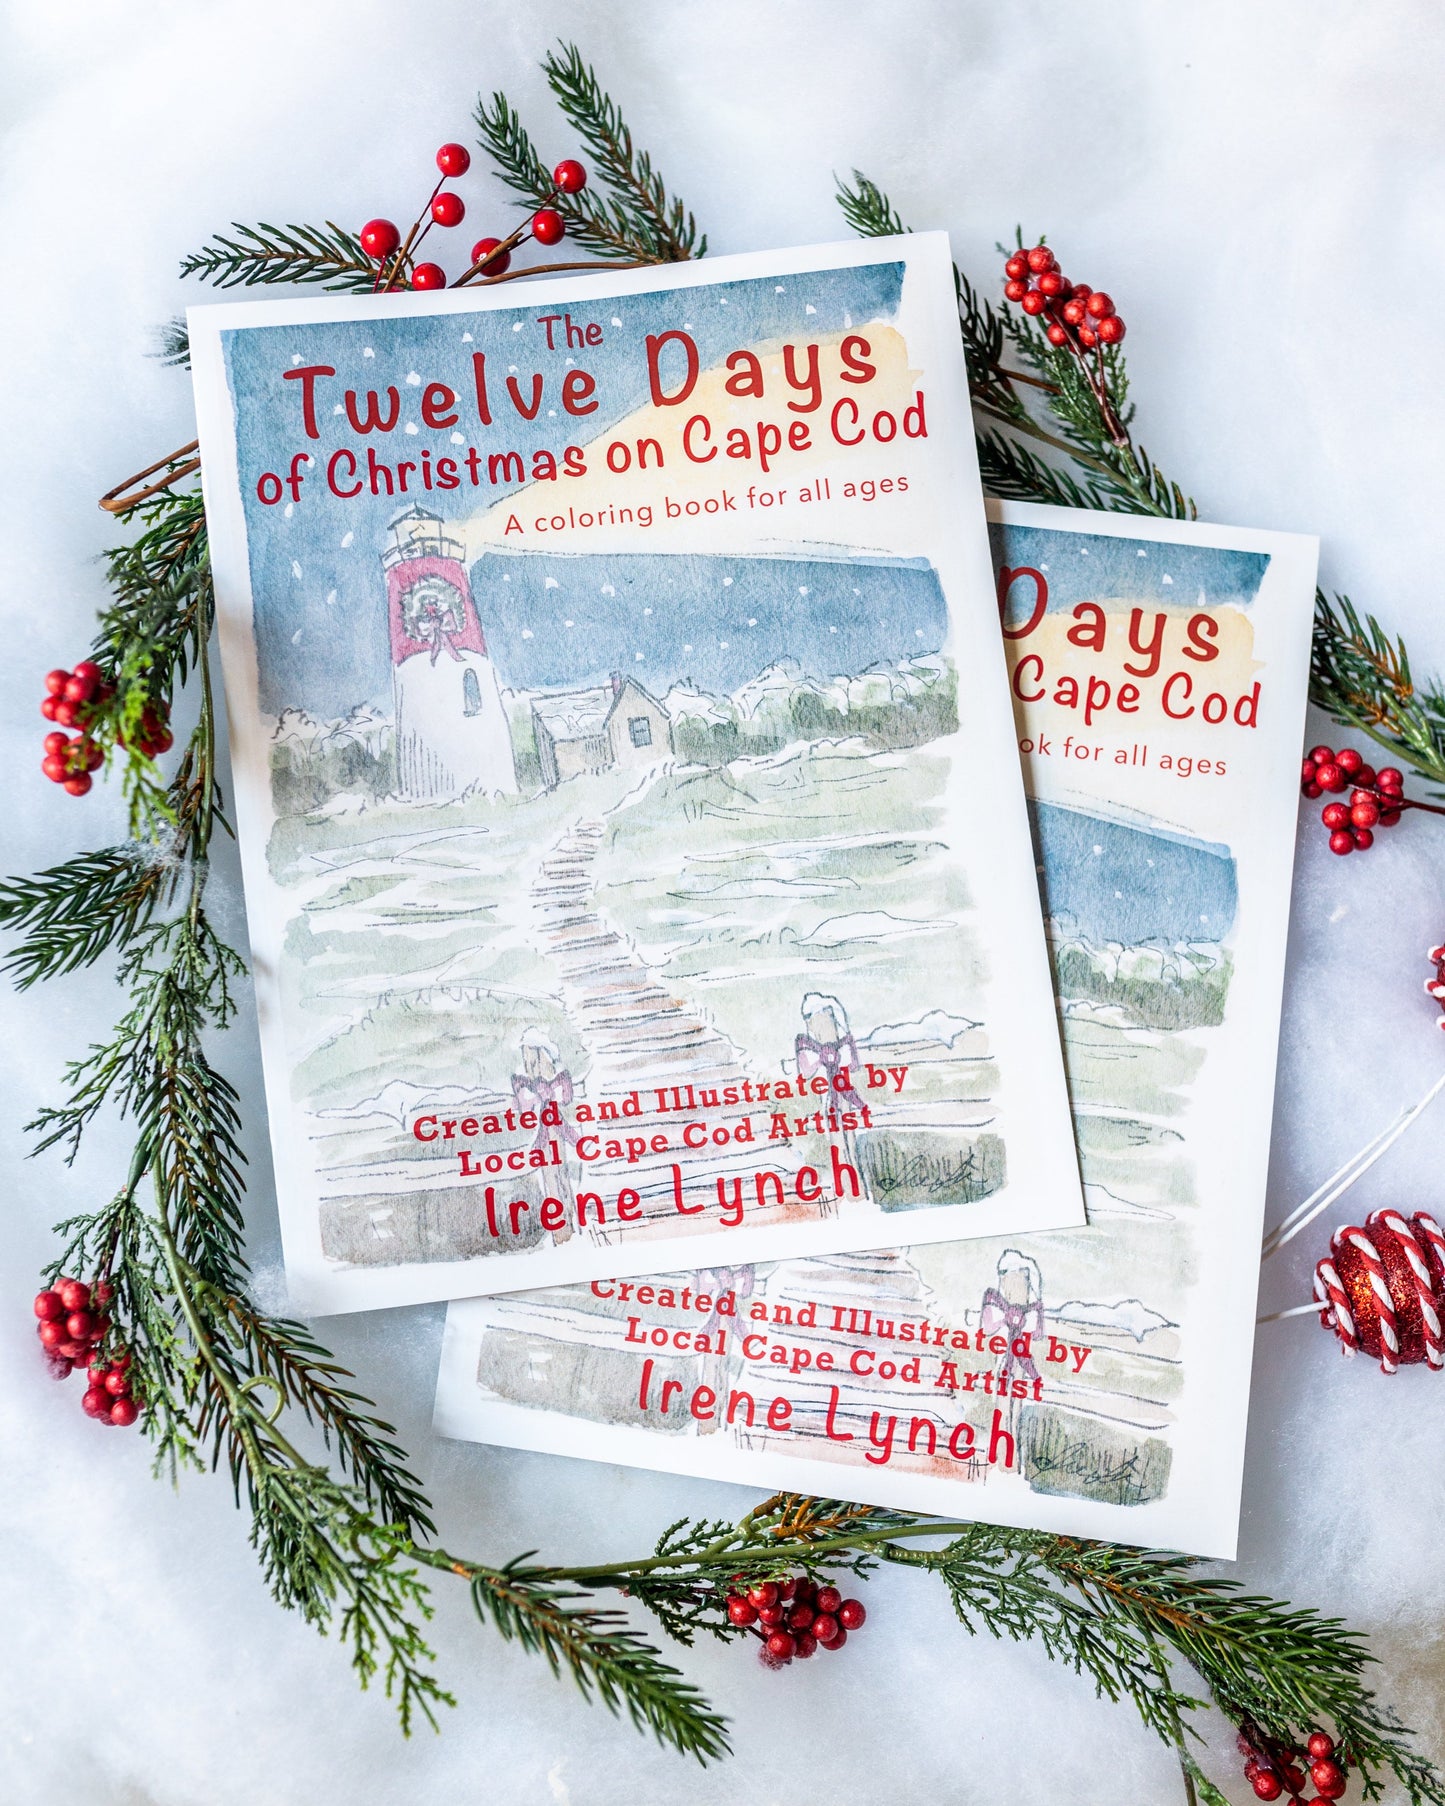 “The Twelve Days of Christmas on Cape Cod” A Coloring Book For All Ages - wholesale